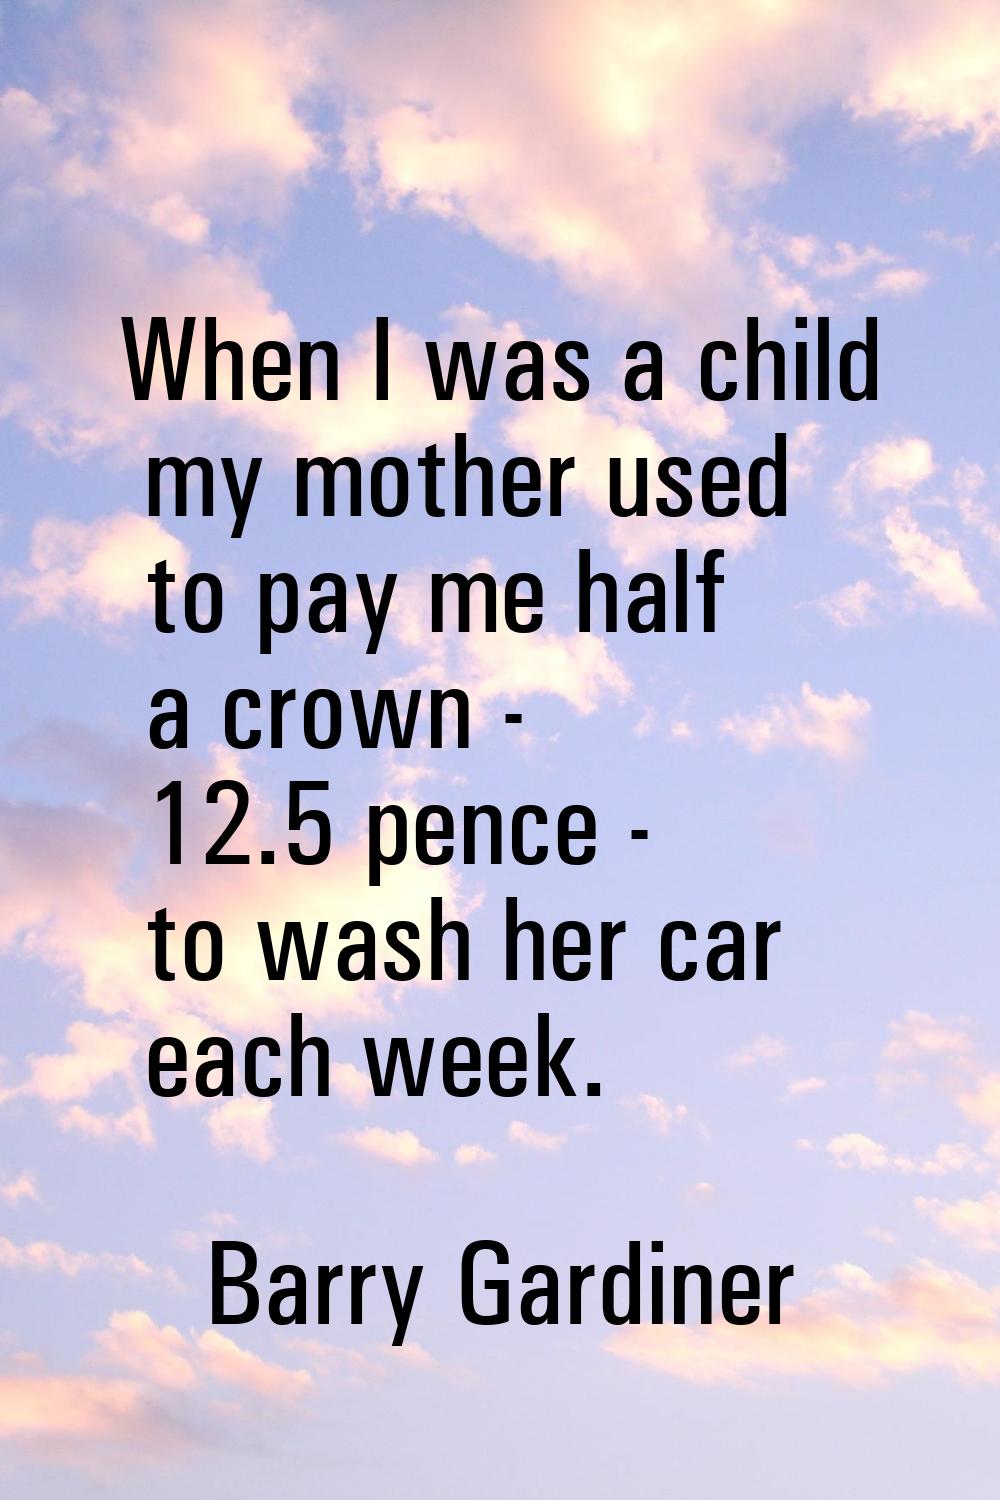 When I was a child my mother used to pay me half a crown - 12.5 pence - to wash her car each week.